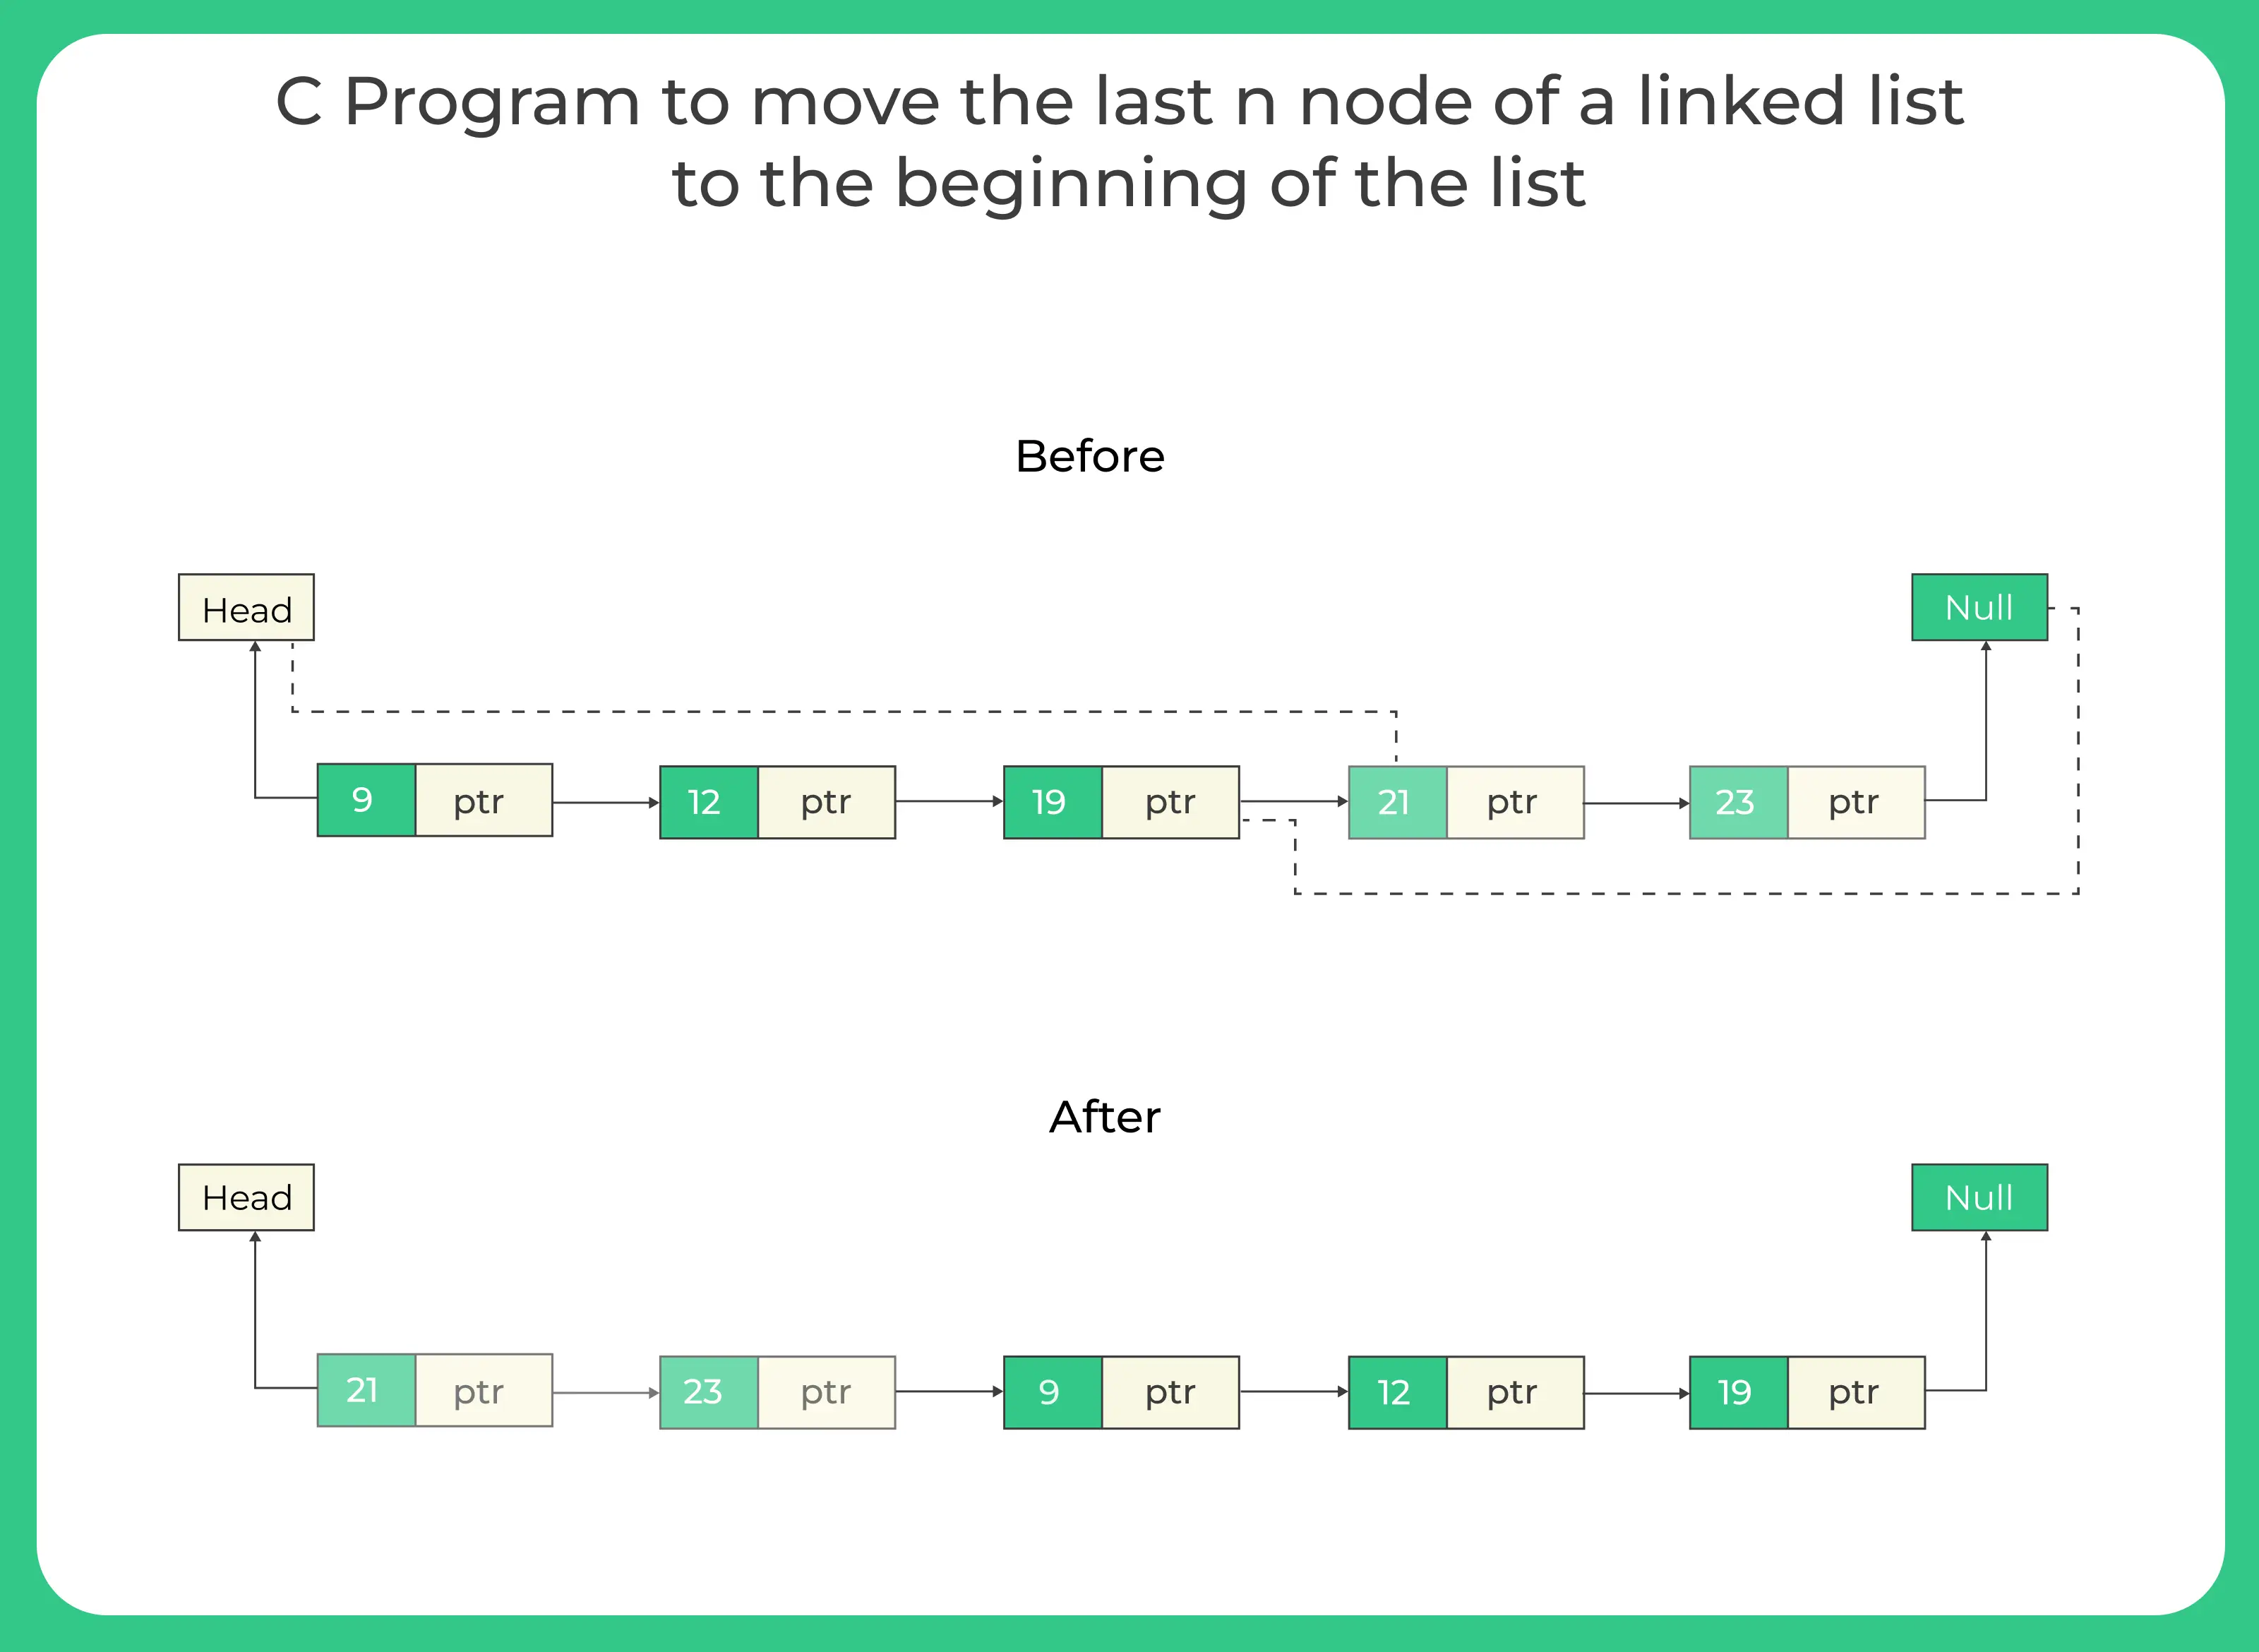 C Program to move the last n node of a linked list to the beginning of the list